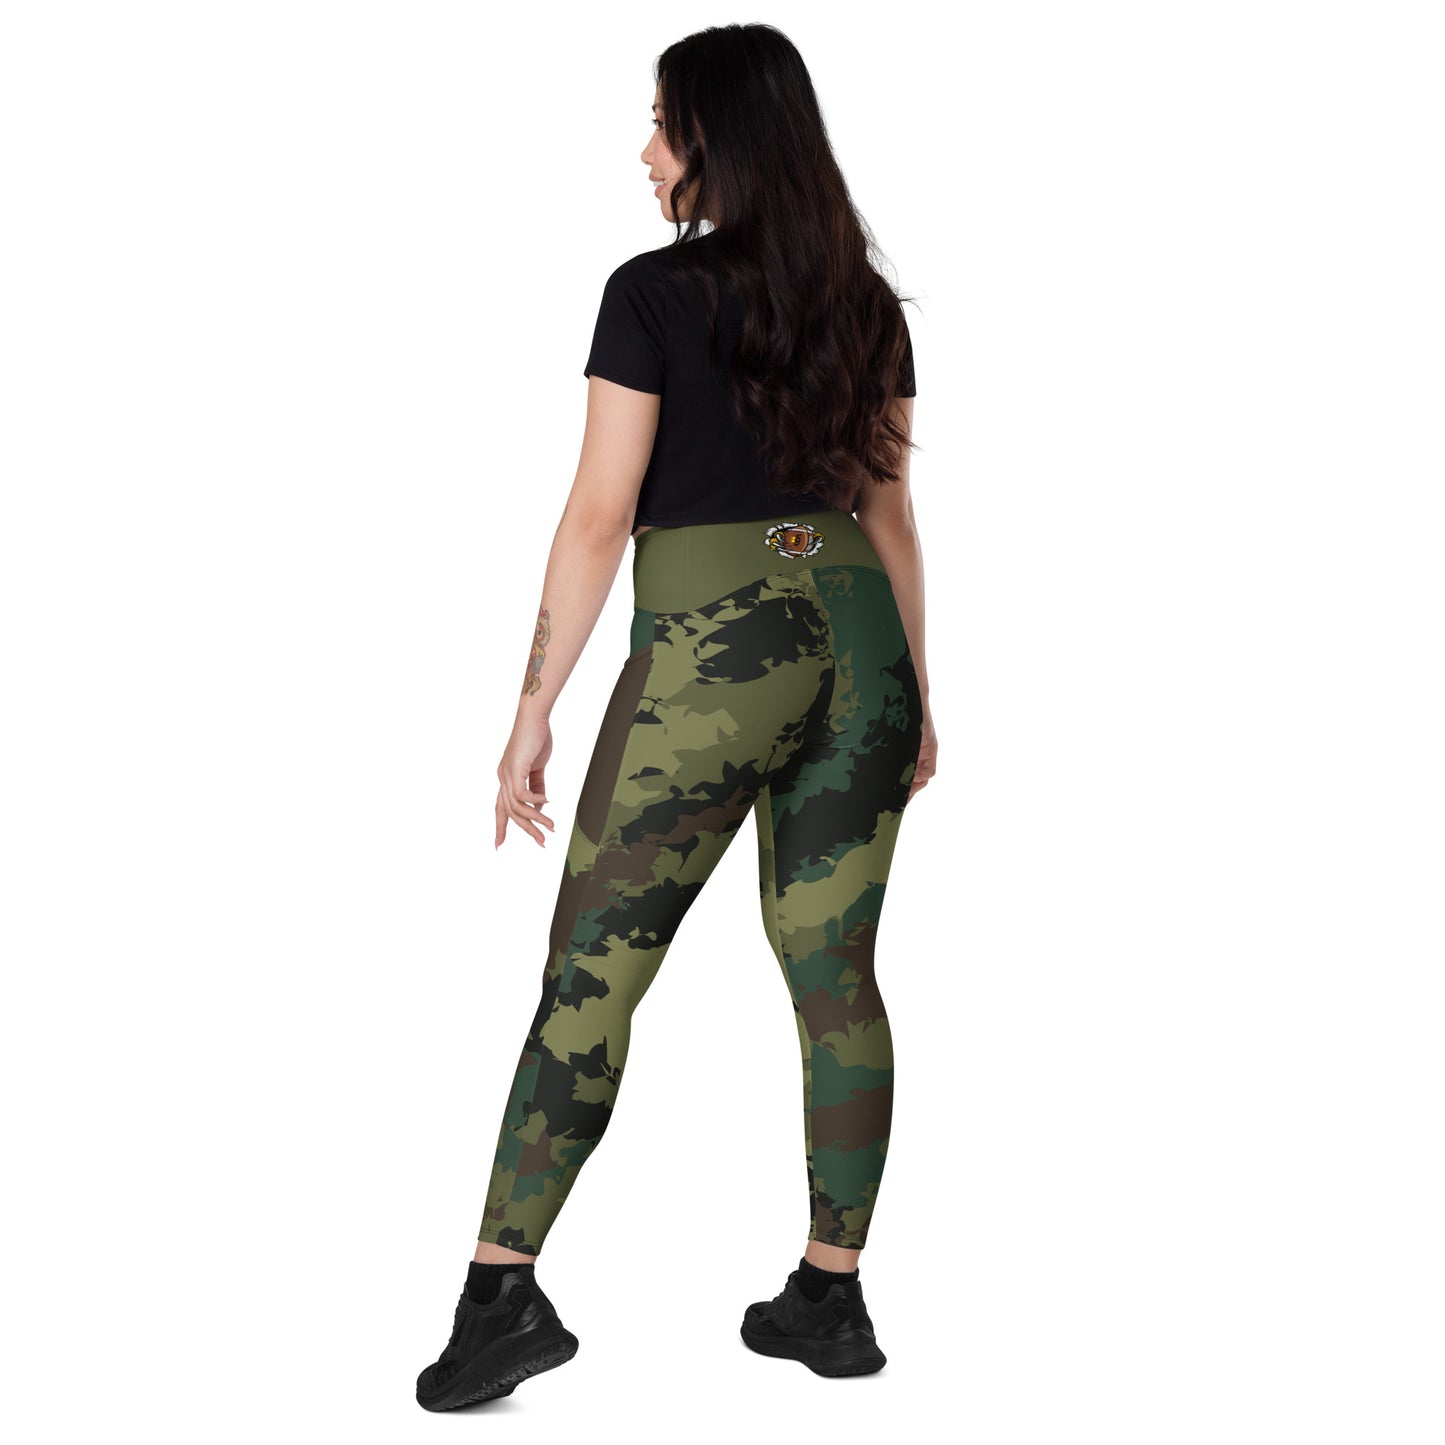 Kicxs Camouflage Leggings With Pockets